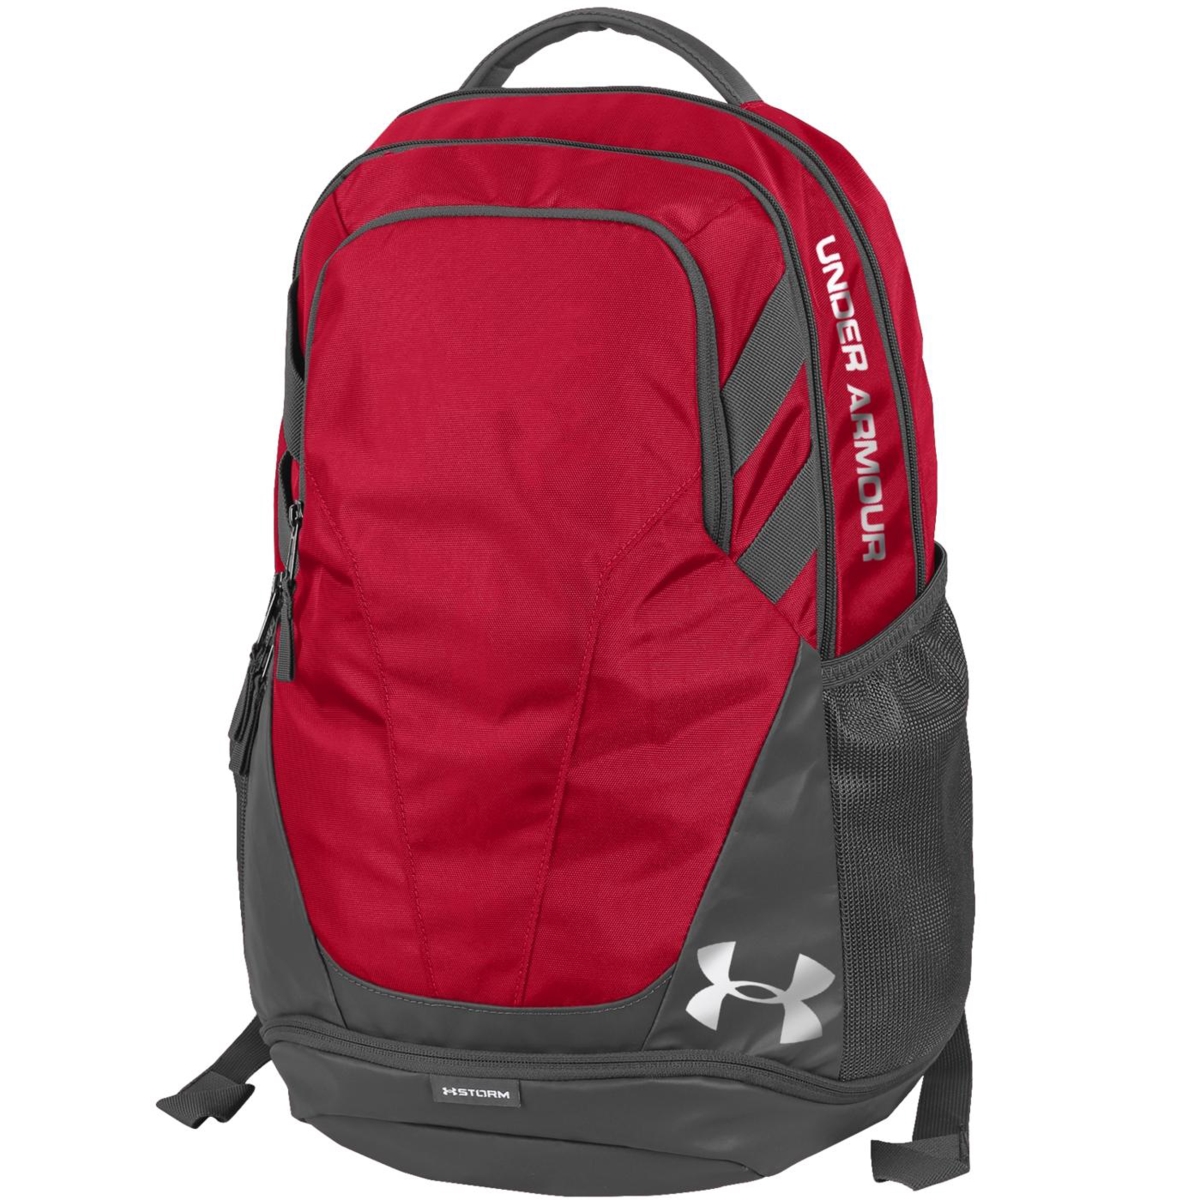 Under Armour 69659 Hustle 3.0 Backpack, Red